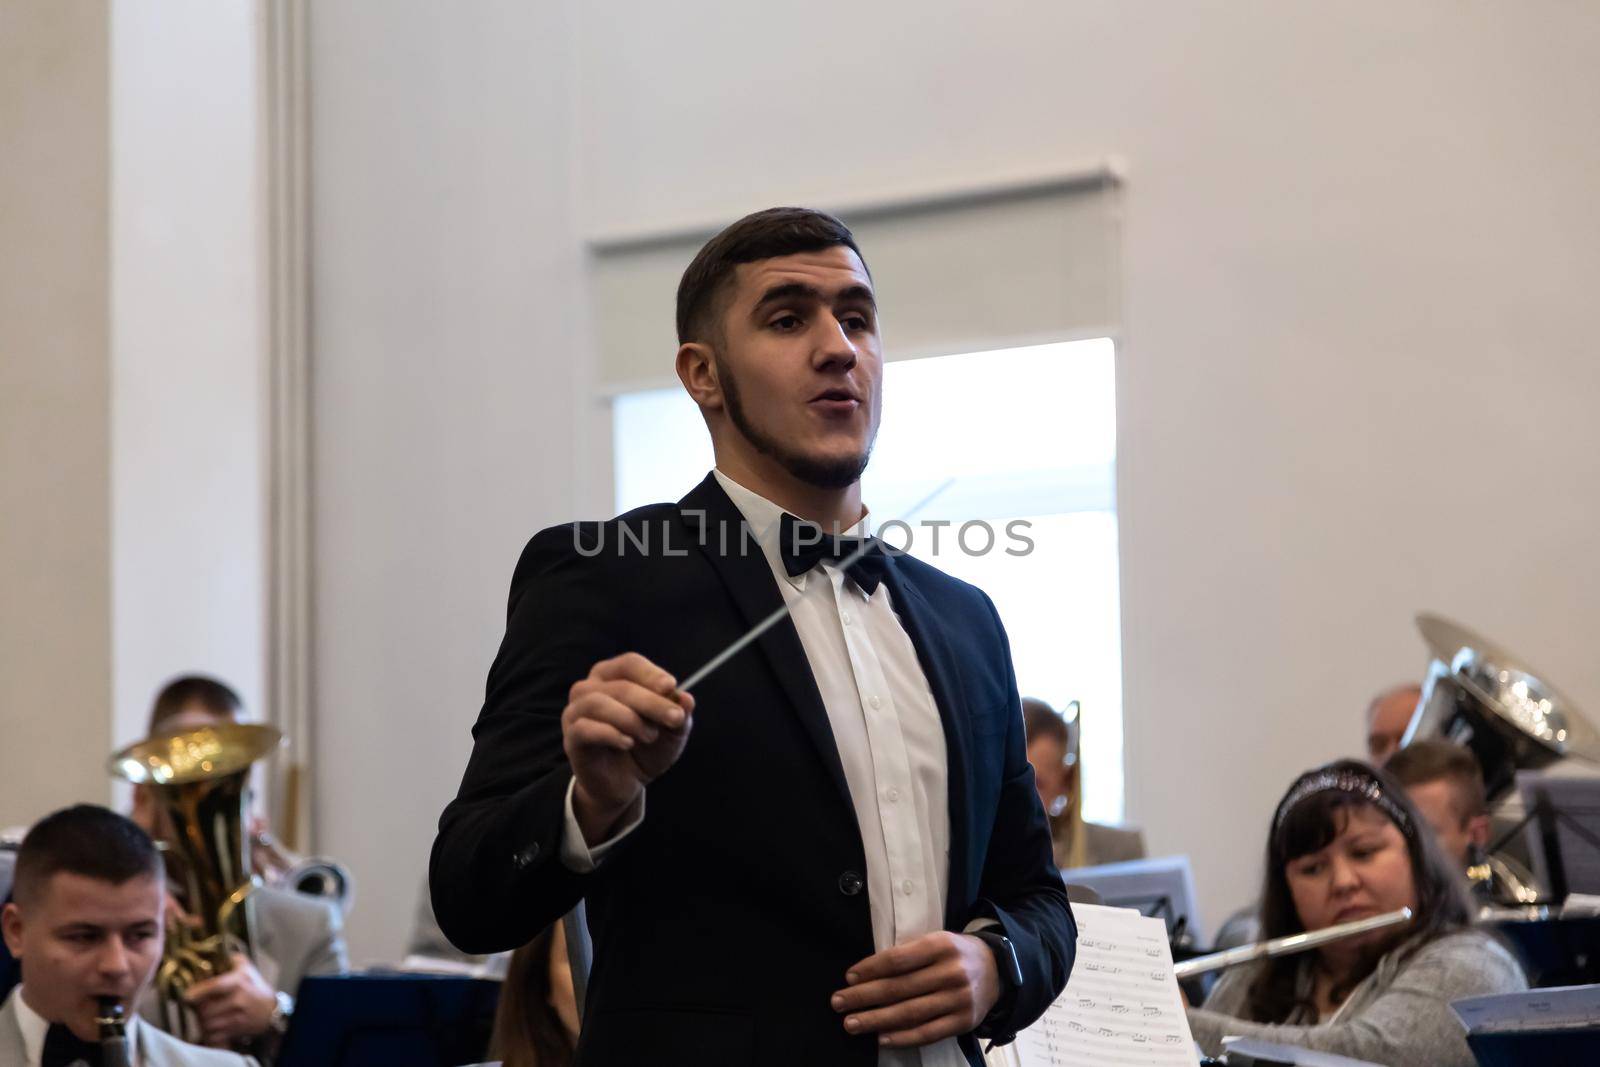 KOROSTEN - NOV, 10, 2019: Young guy orchestra conductor in a black suit. In the background is an orchestra. by lunarts